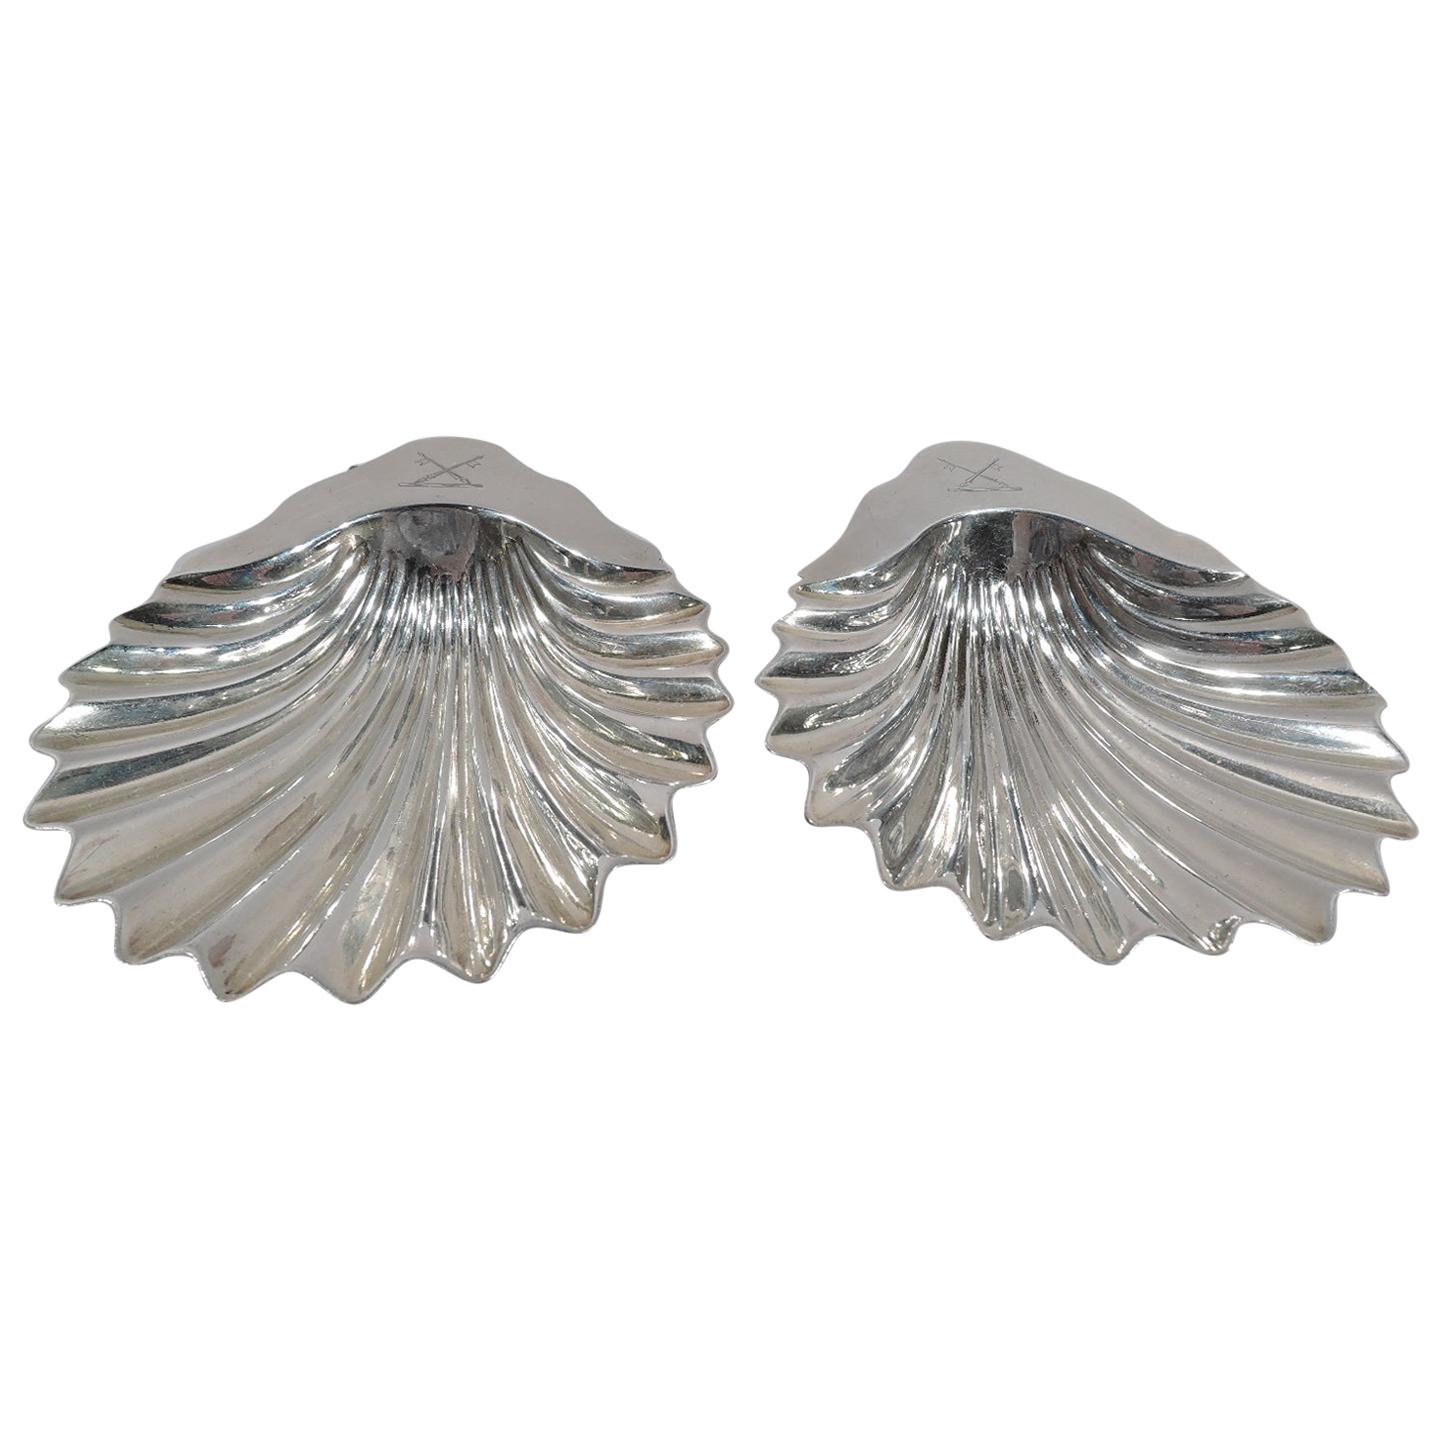 Pair of English Victorian Sterling Silver Scallop Shell Dishes